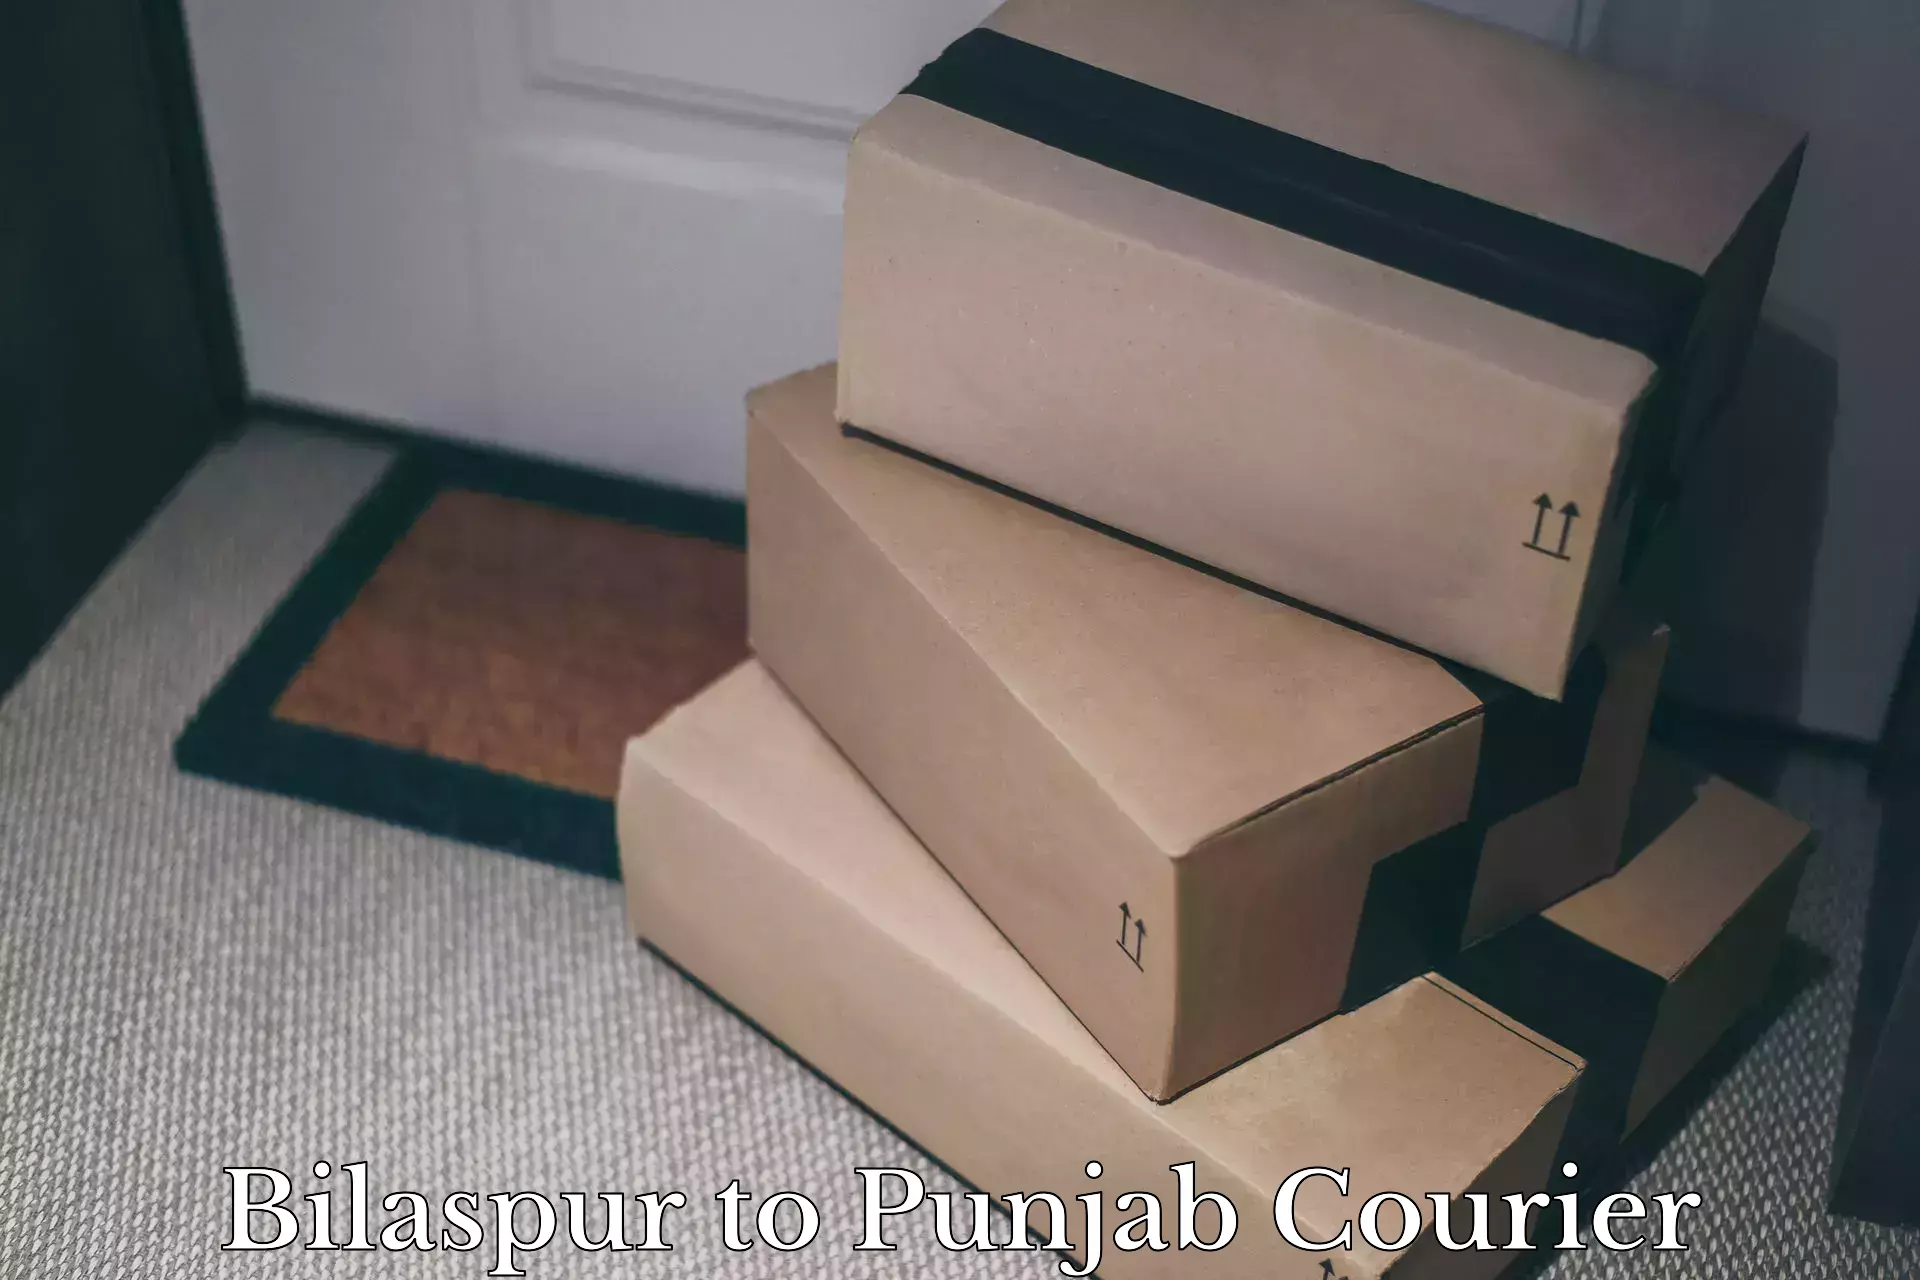 Professional furniture movers in Bilaspur to Nawanshahr